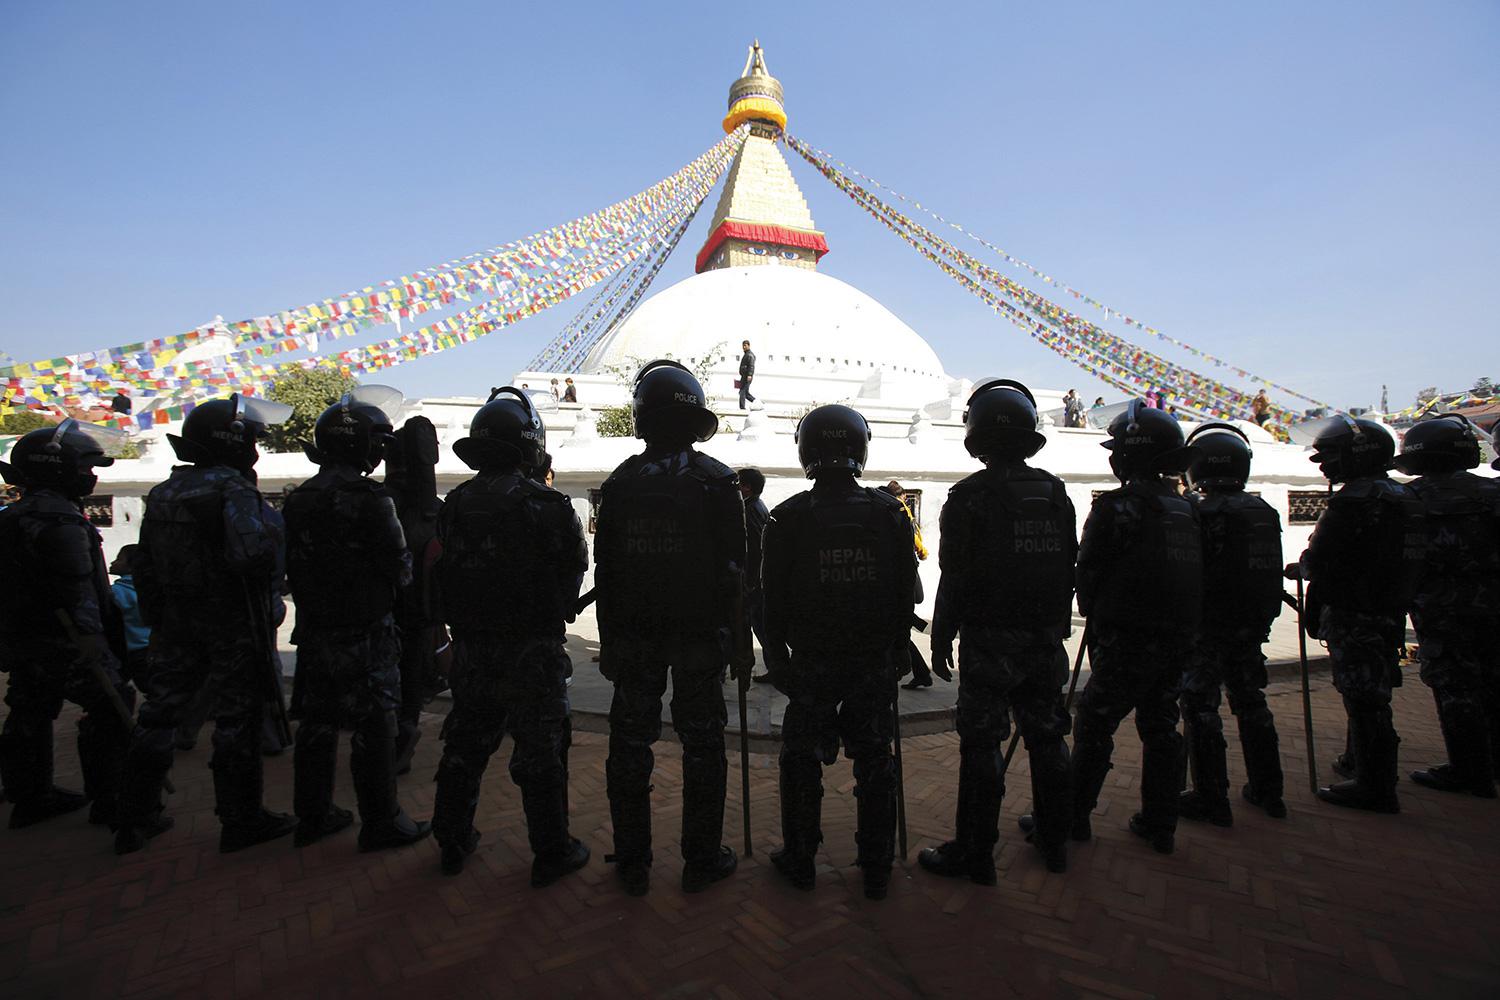 Nepalese police stand guard at the premises of the Boudhanath Stupa after a Tibetan monk self-immolated in Kathmandu on February 13, 2013.